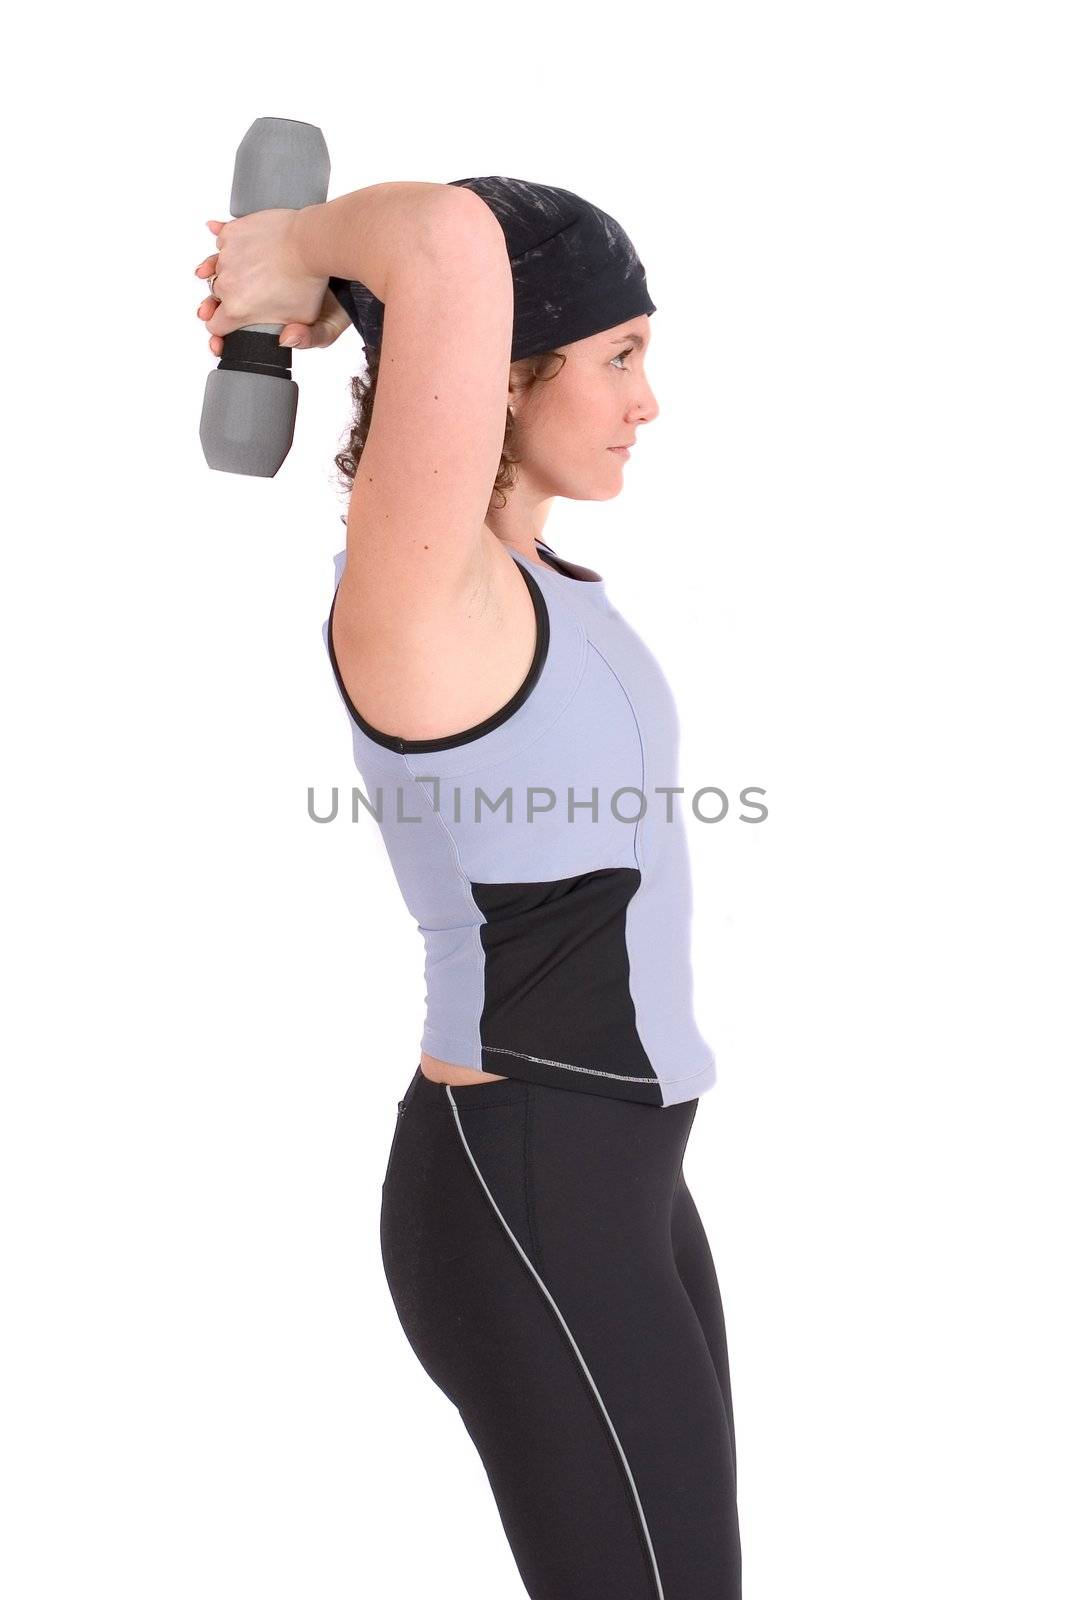 Attractive young woman doing triceps curls standing